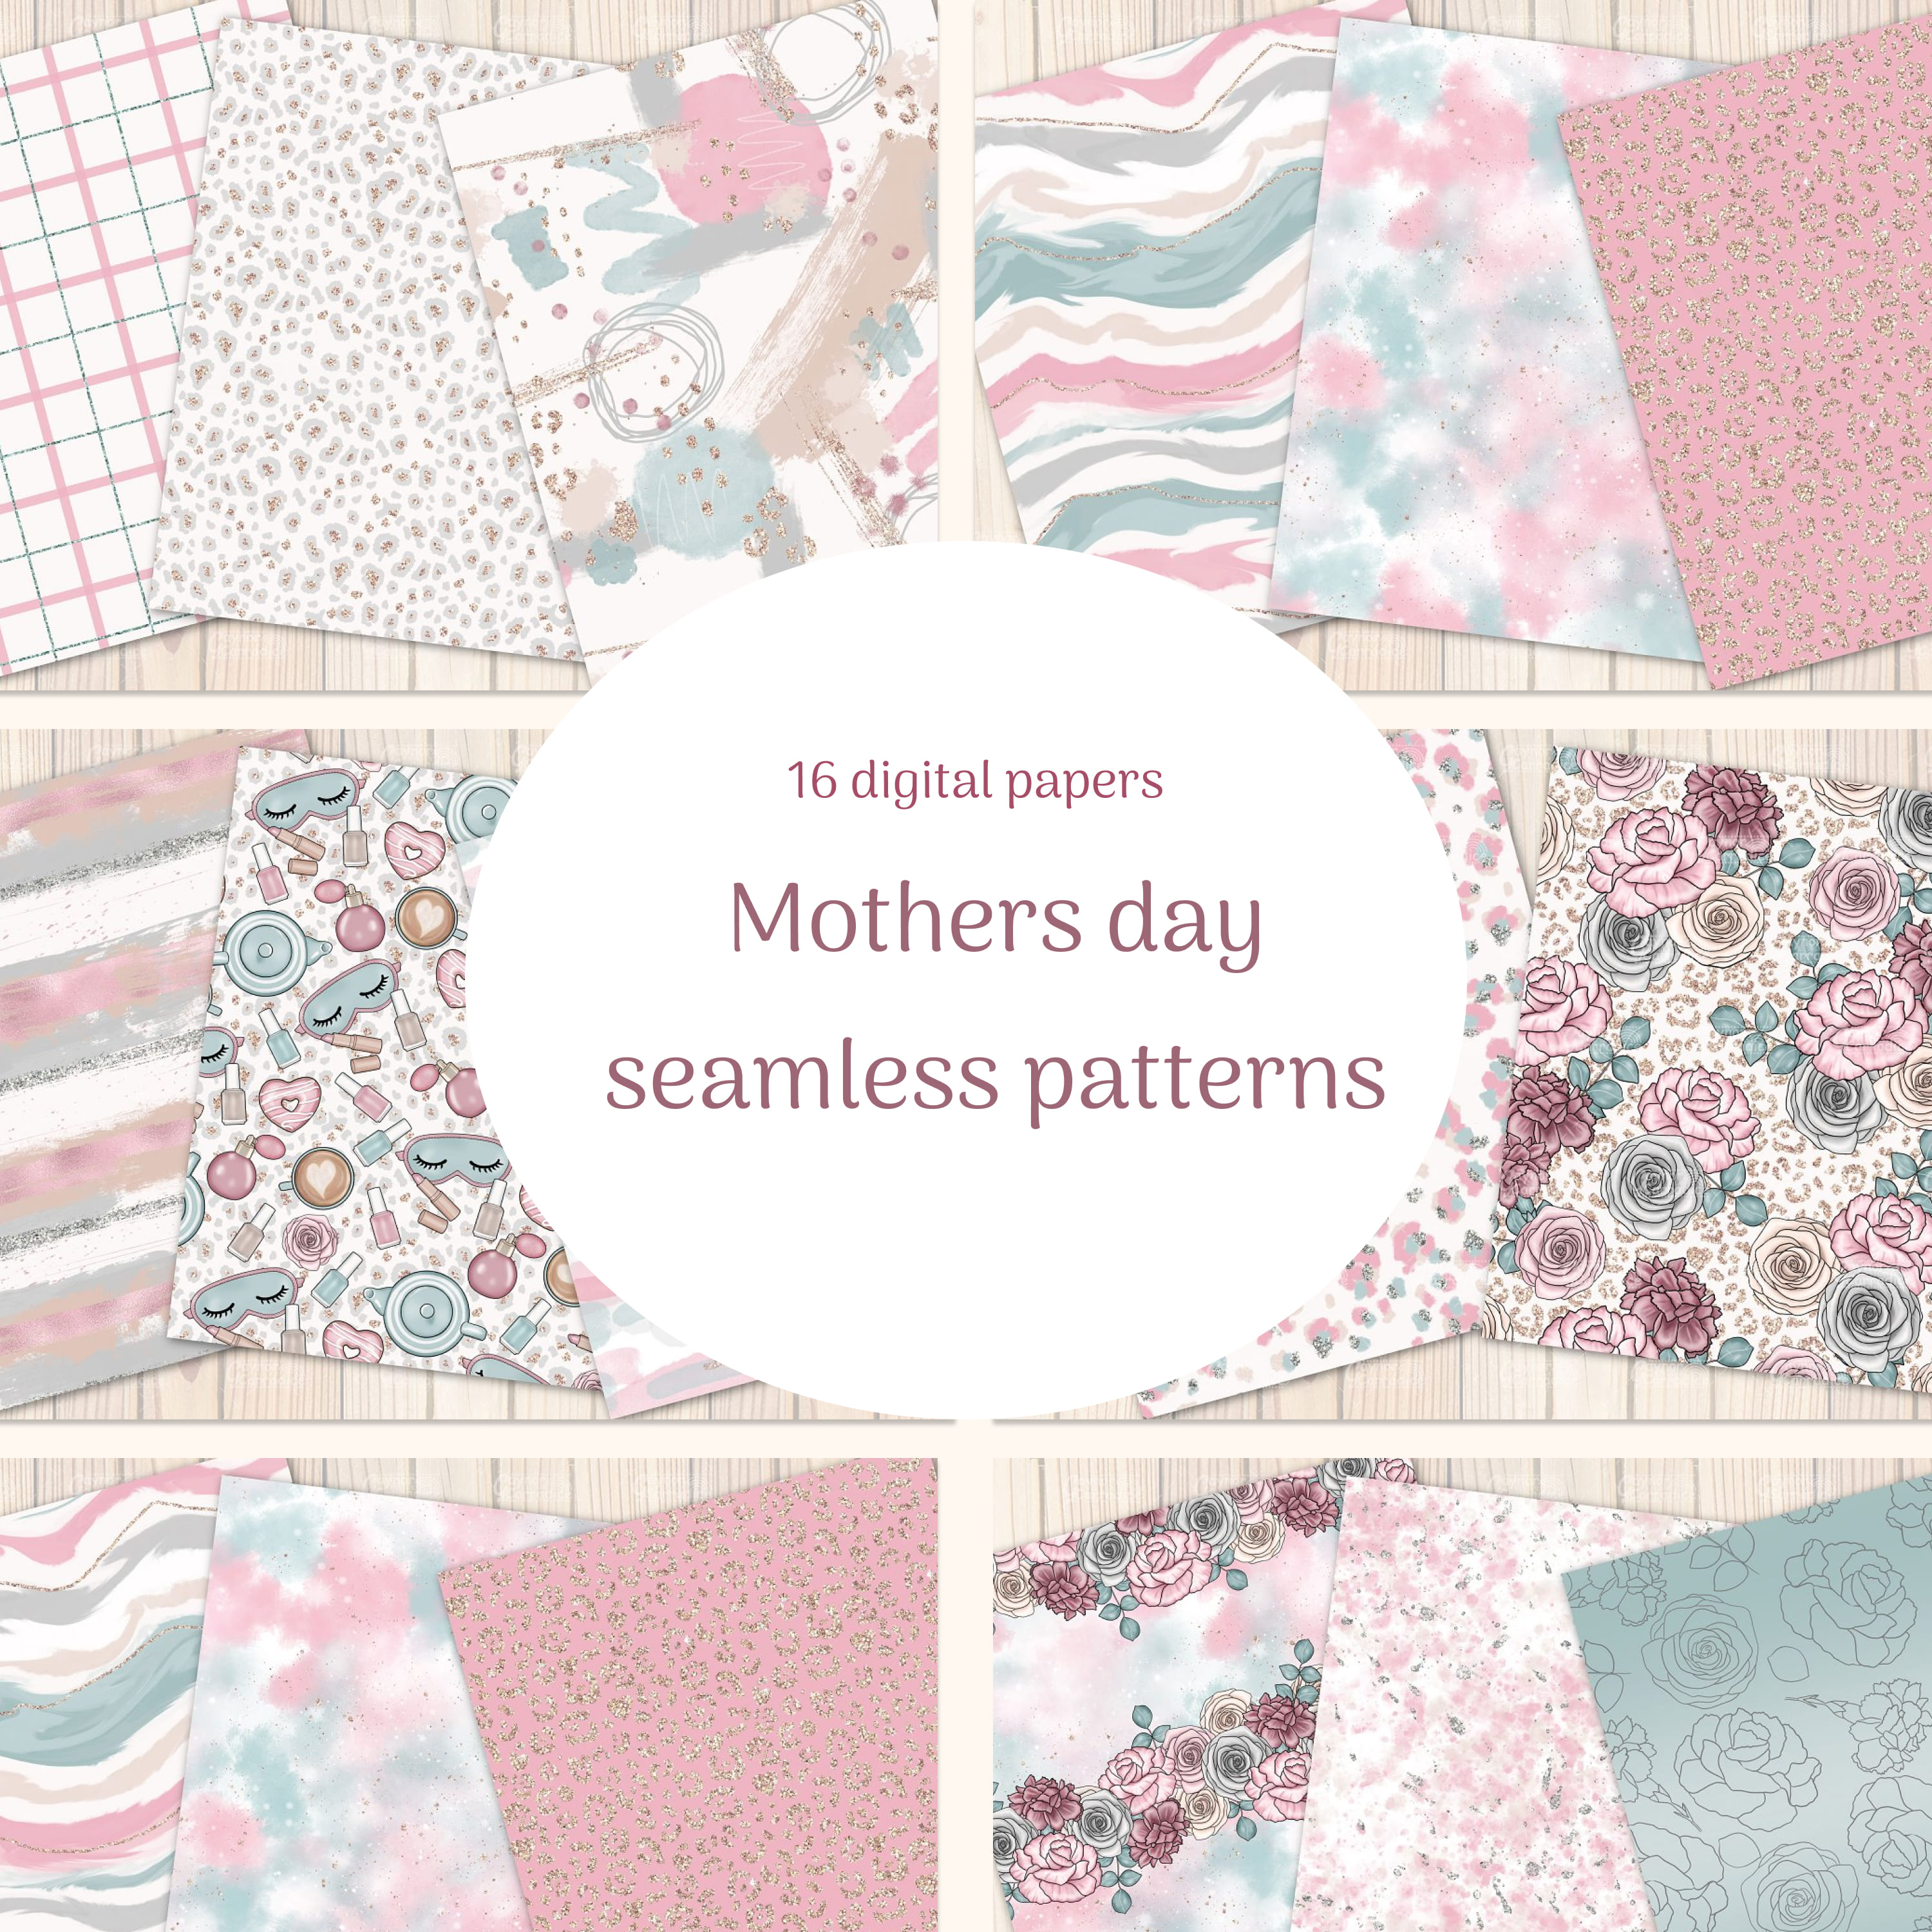 Mothers day seamless patterns.